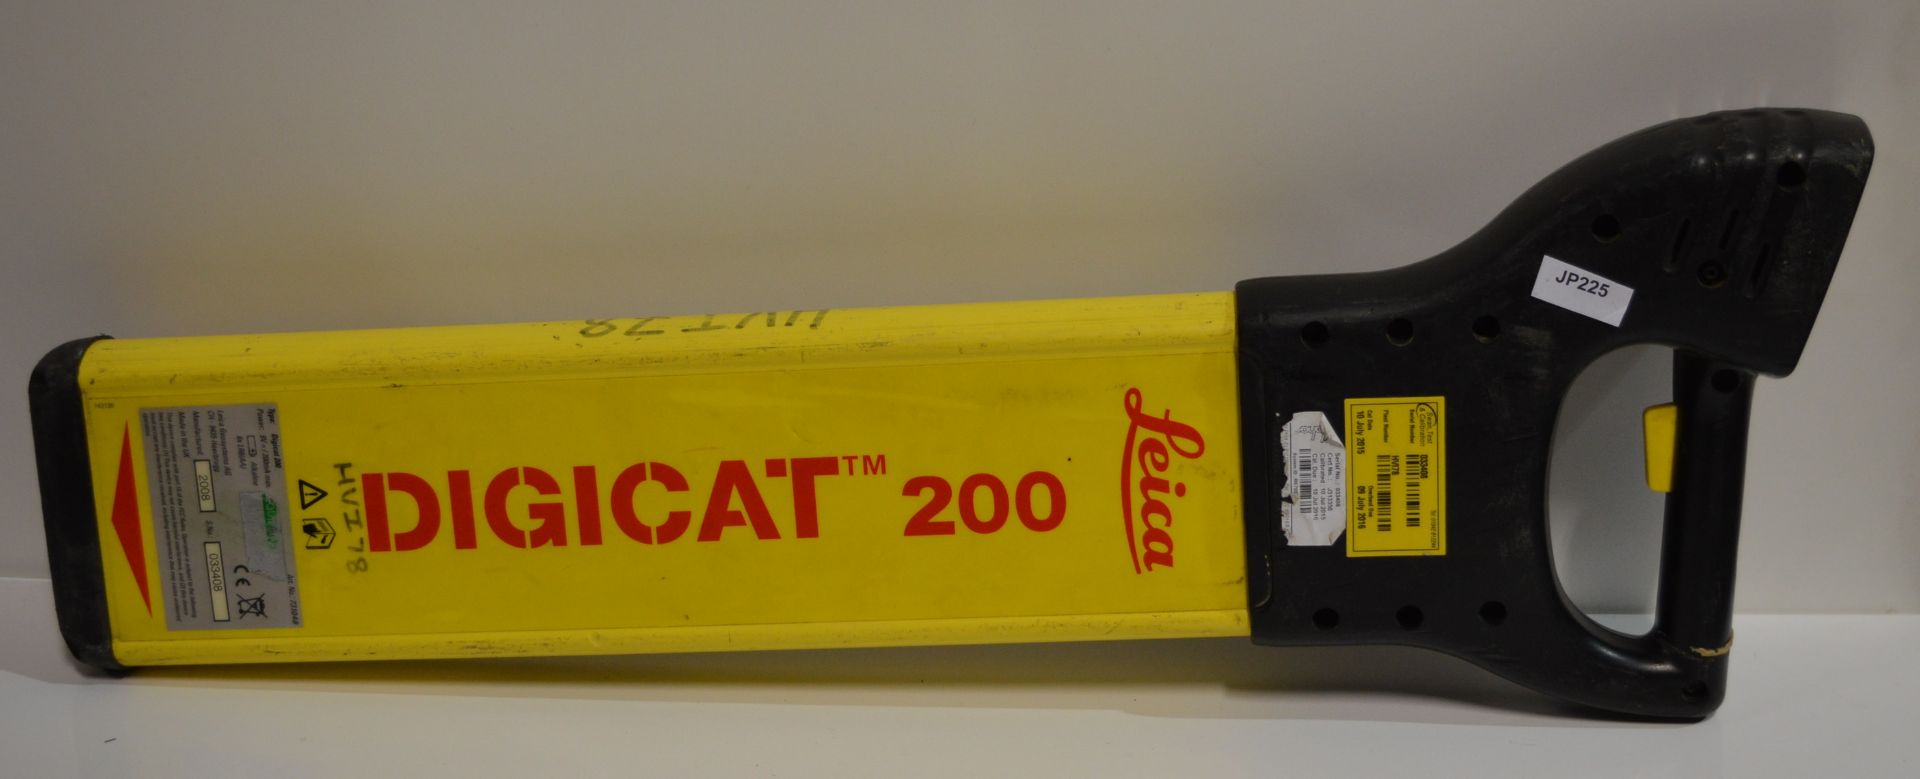 1 x Leica Digicat 200 Cable and Pipe Location Detector With Depth Reading Facility - CL007 - Ref